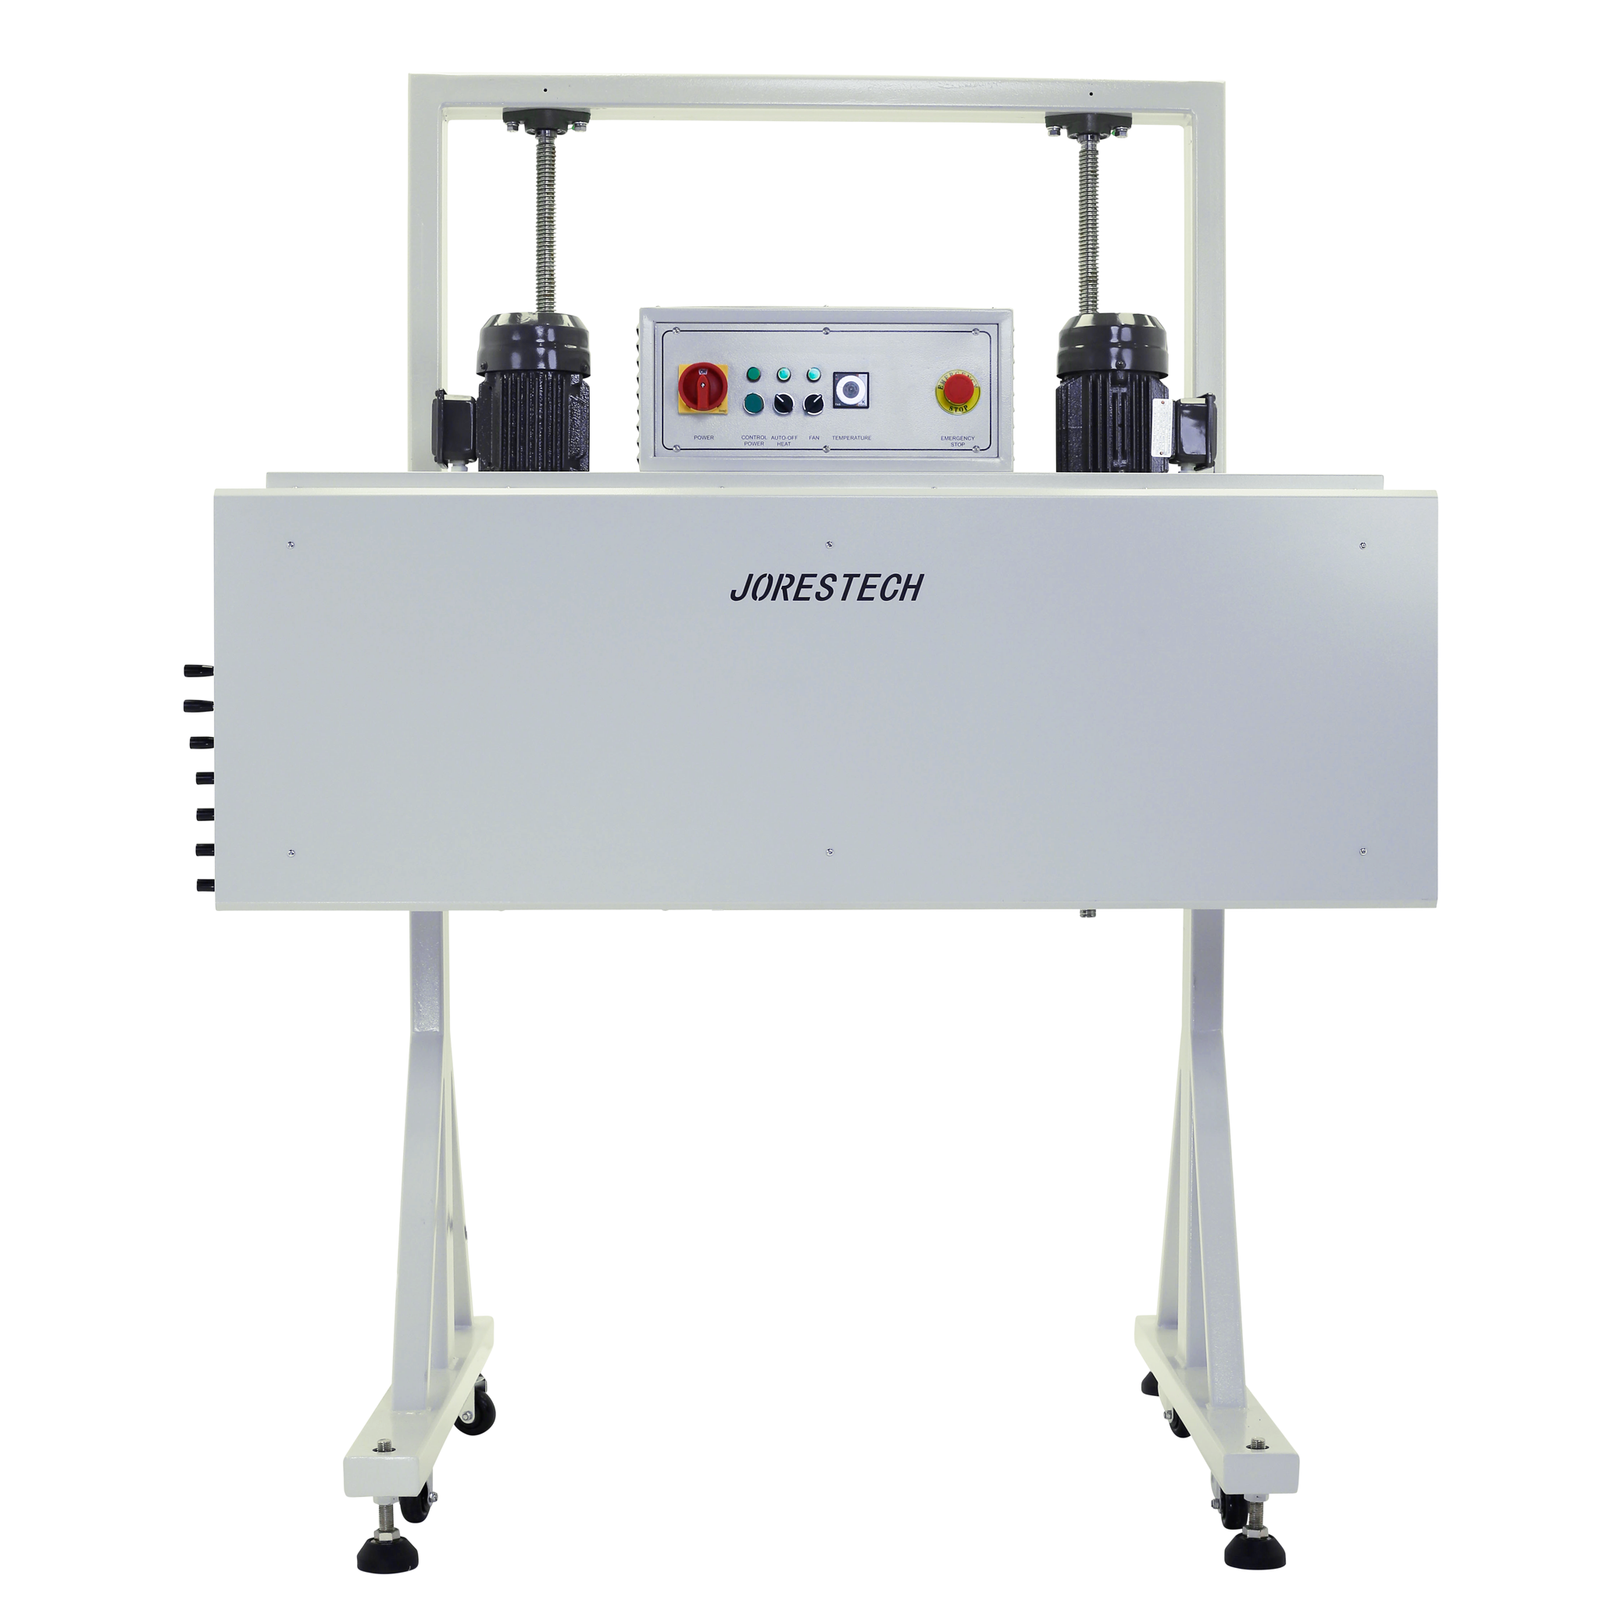 JORESTECH sleeve wrapping heat tunnel machine shown in a frontal view over white background.